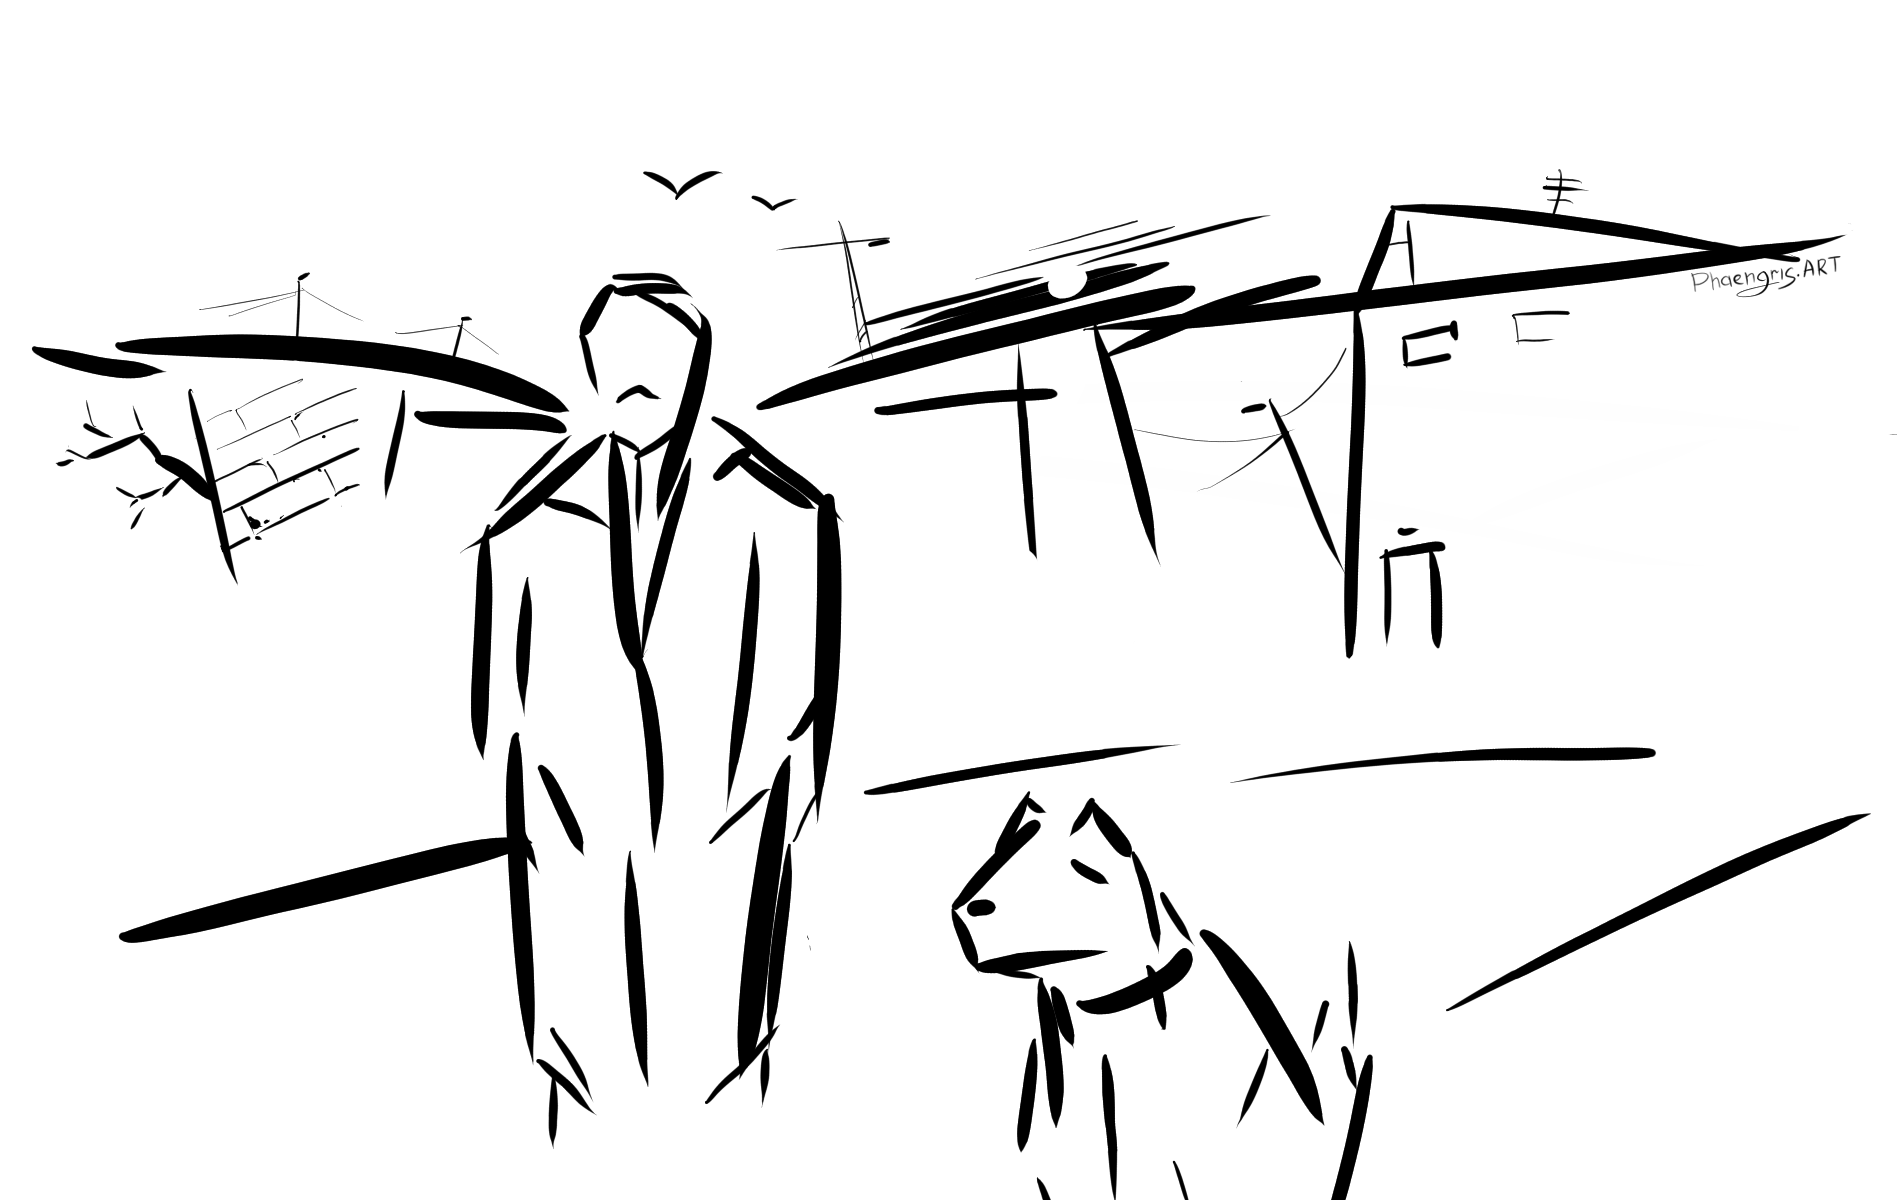 A black and white sketch of a man and his dog, with citylike background behind them